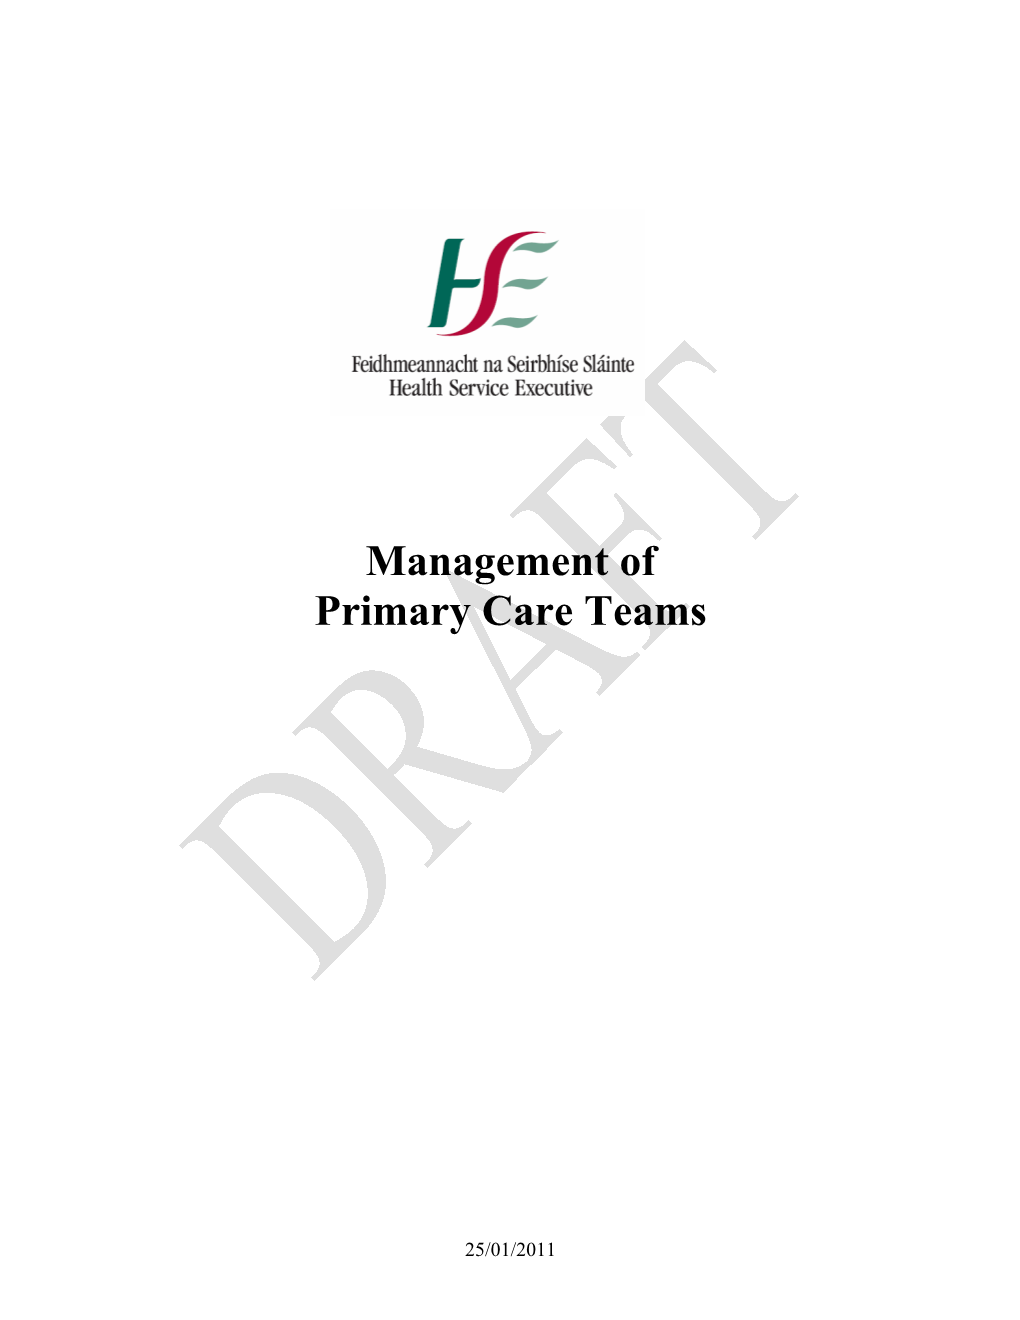 Management of Primary Care Teams